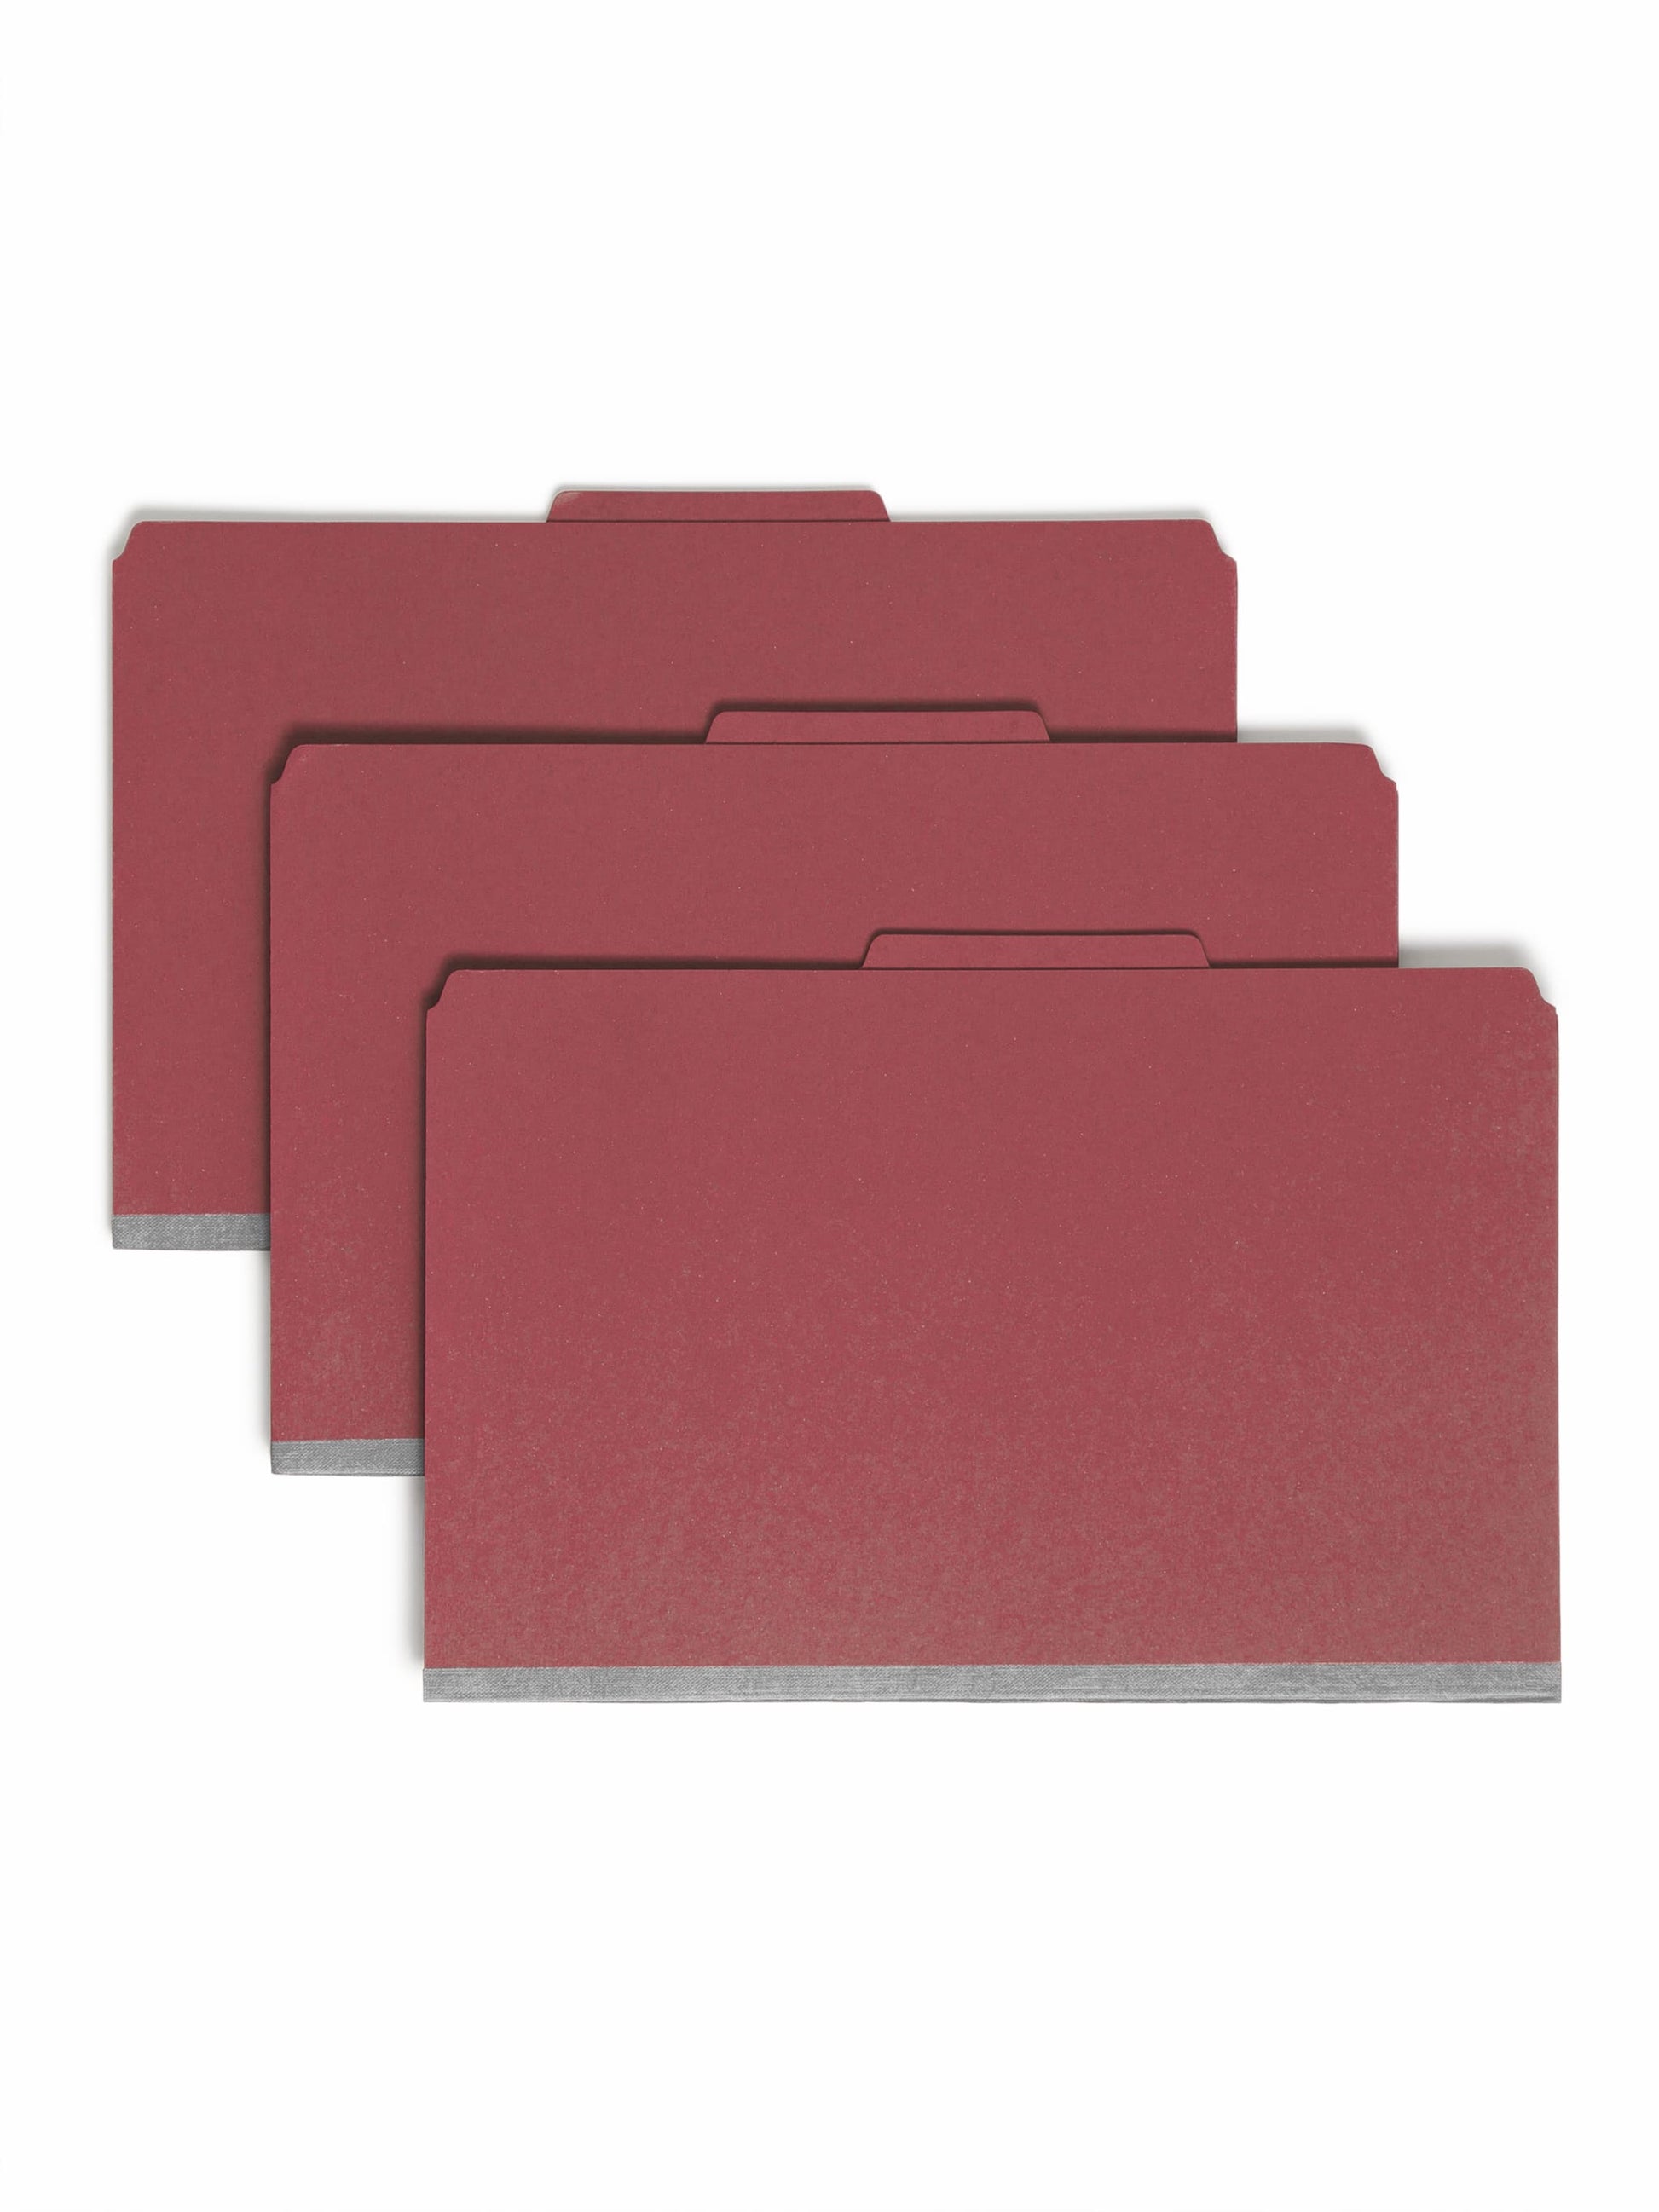 SafeSHIELD® Pressboard Classification File Folders, 2 Dividers, 2 inch Expansion, 2/5-Cut Tab, Bright Red Color, Legal Size, 